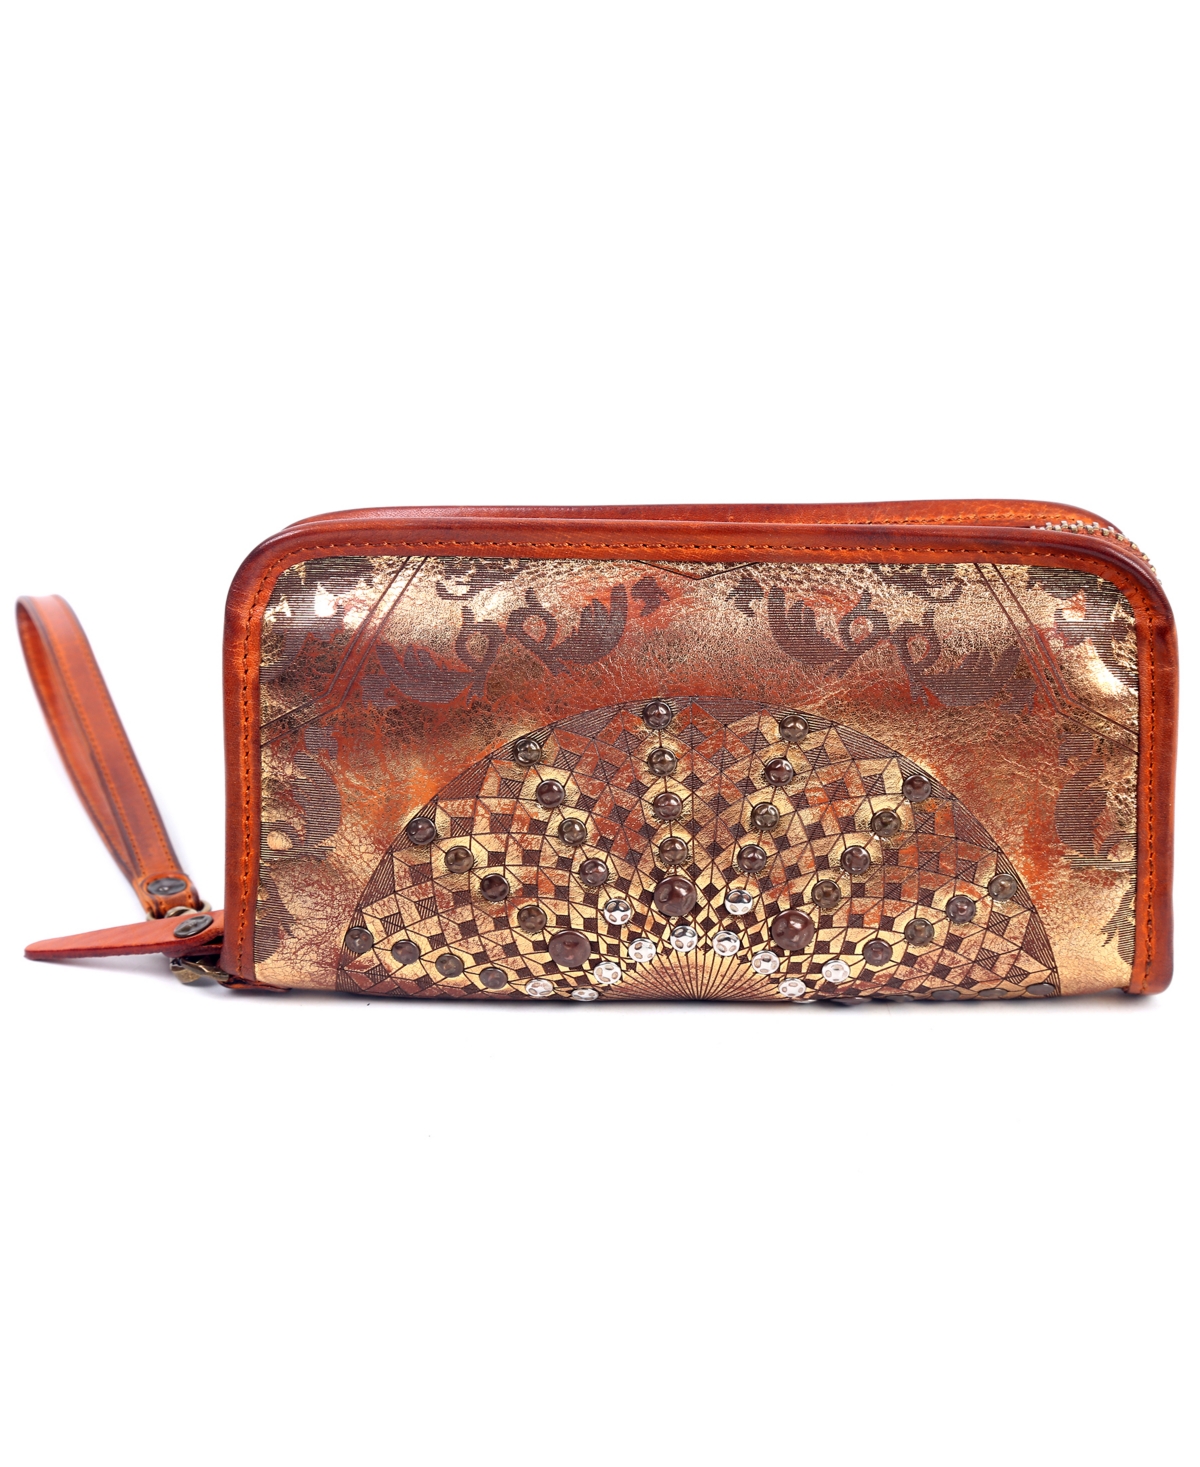 Mola Leather Clutch - Gold